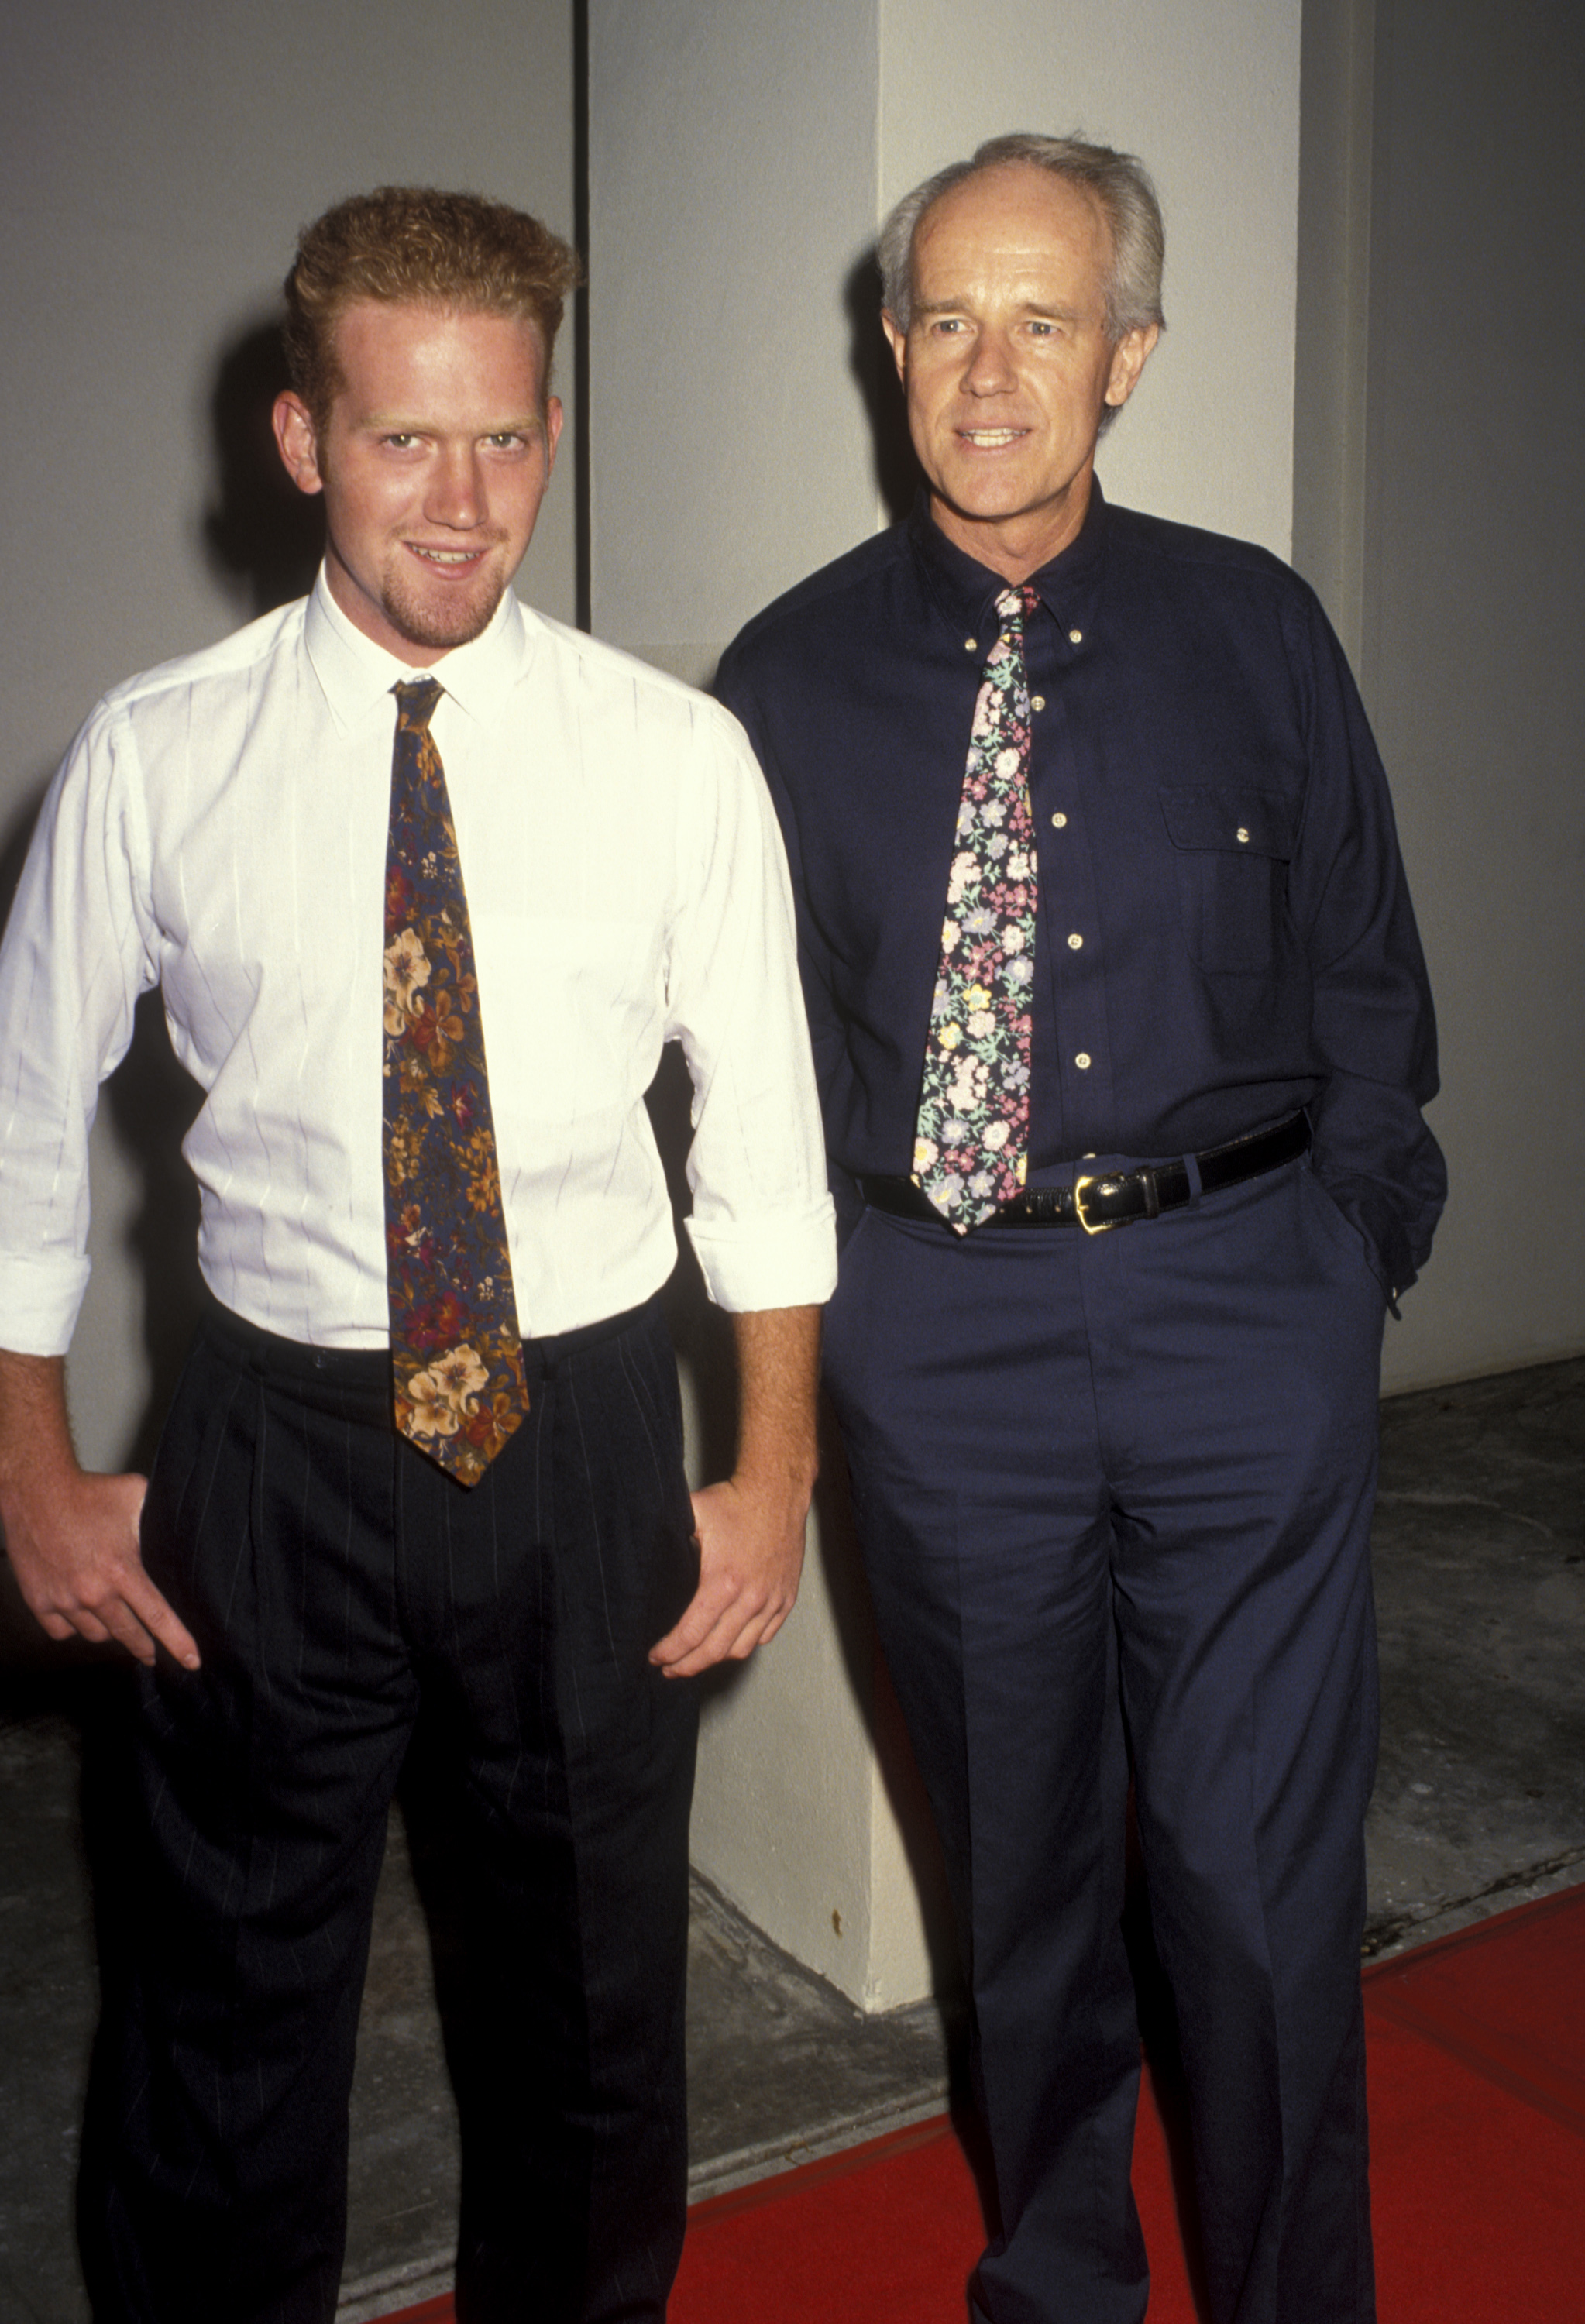 Mike and Michael Farrell at the "Bob Roberts" benefit premiere in Beverly Hills, 1992 | Source: Getty Images